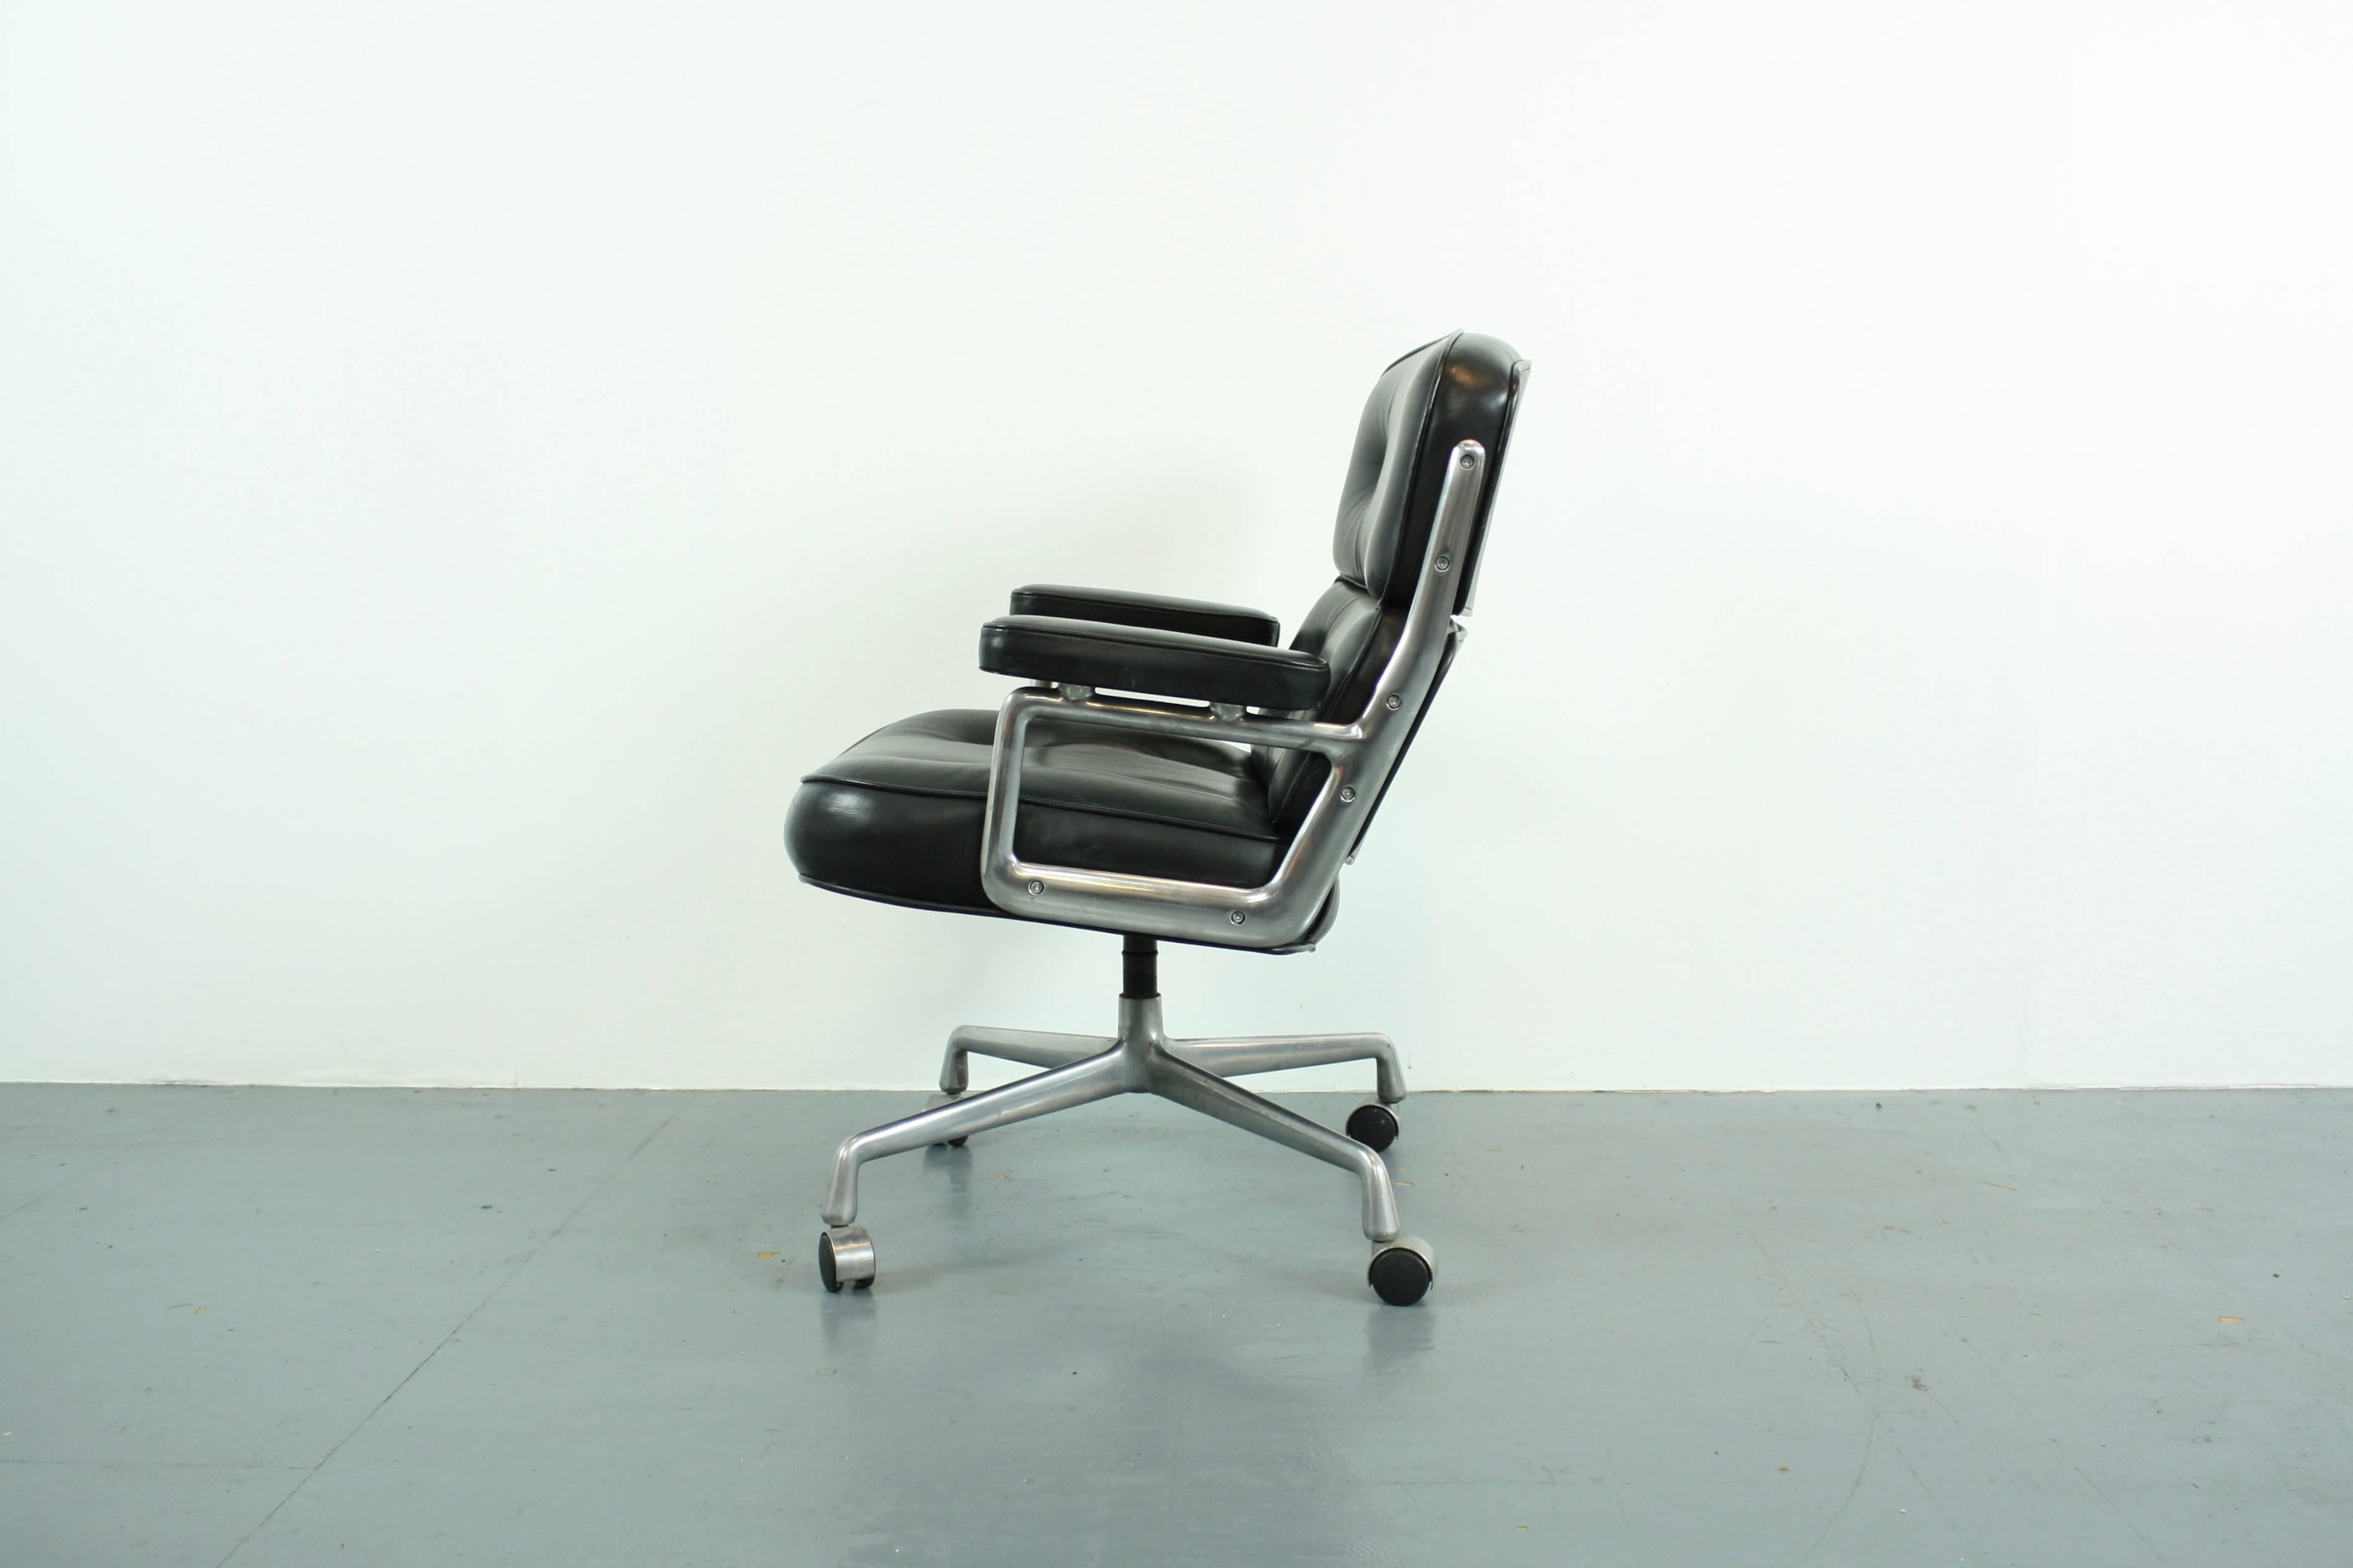 Vintage Midcentury Black Leather Time-Life Chair by Eames for Herman Miller In Good Condition For Sale In Lewes, East Sussex